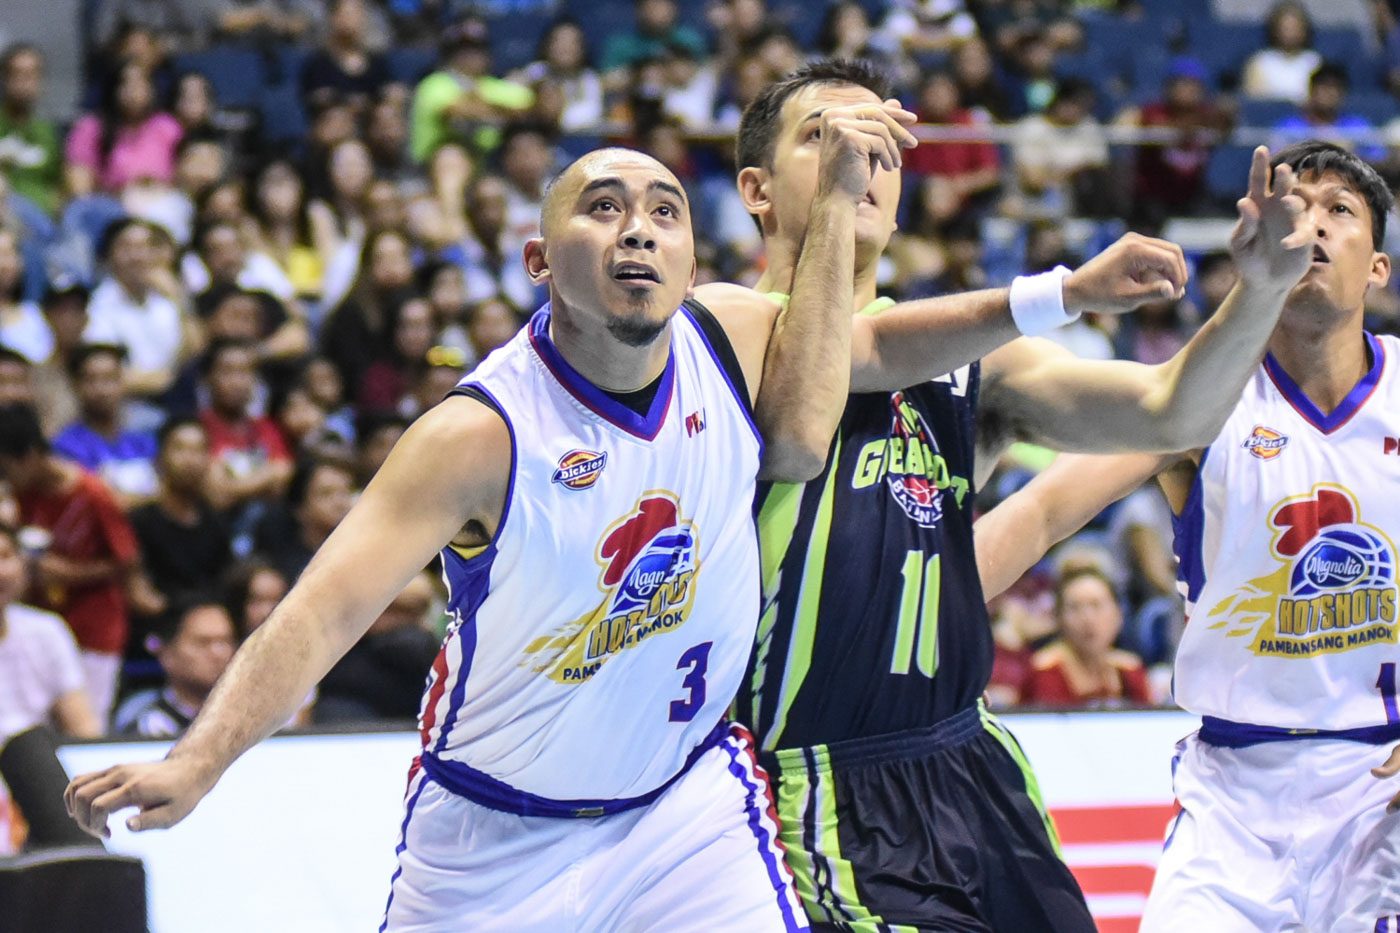 Returning Paul Lee makes quick impact as Magnolia claims No. 1 spot